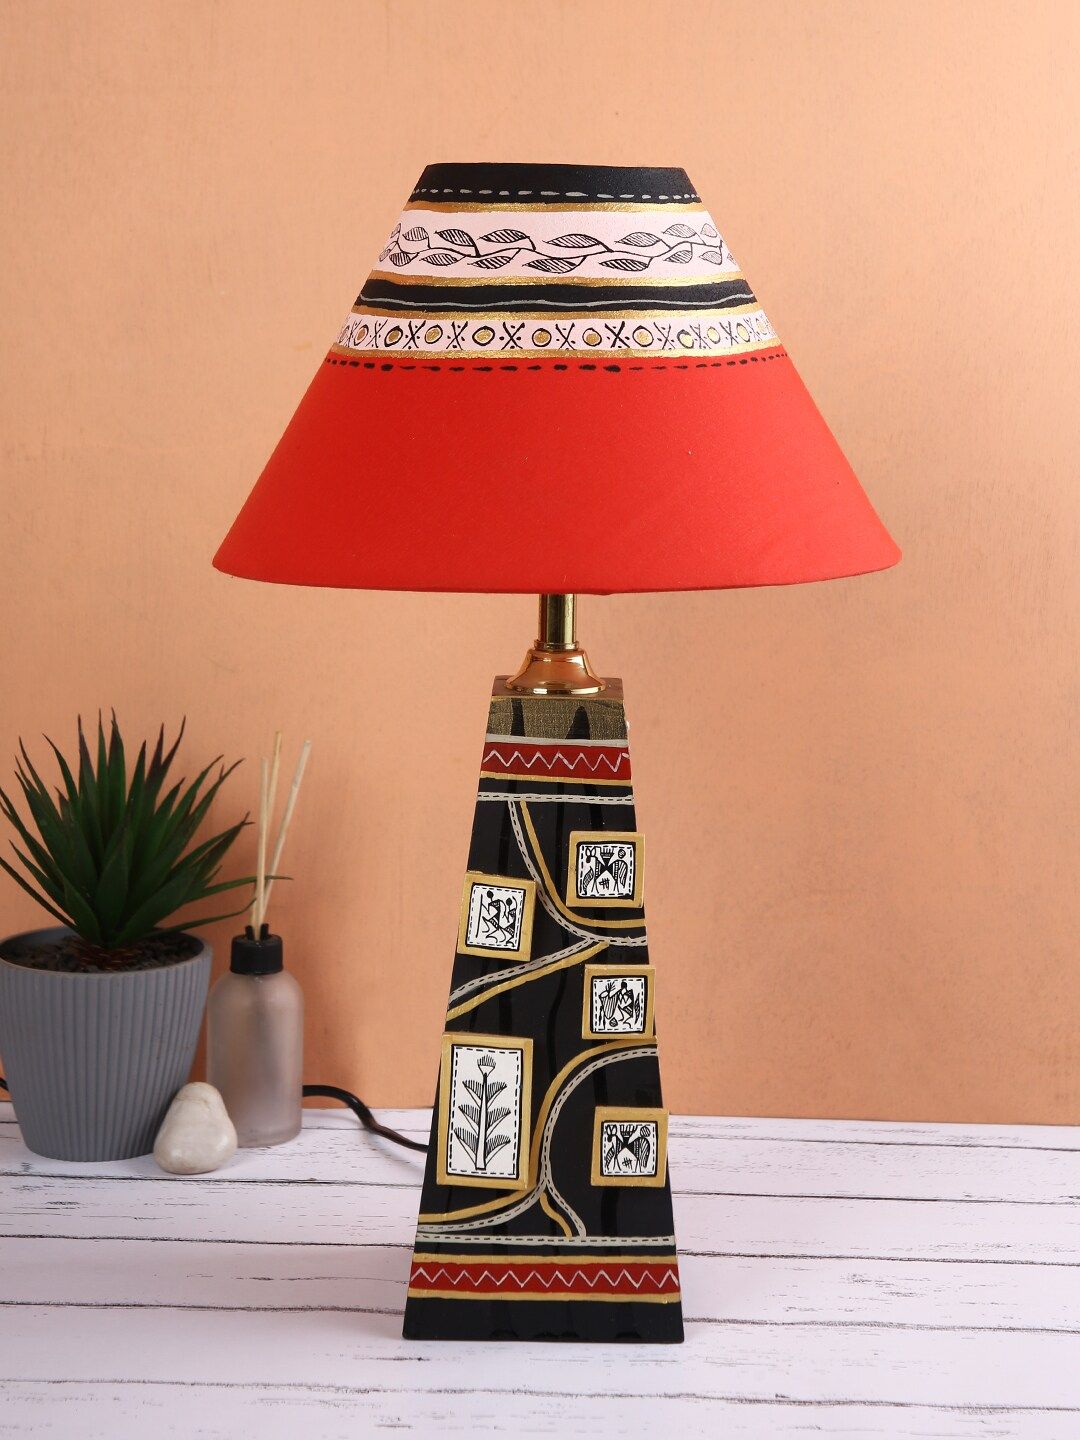 Aapno Rajasthan Red & Cream-Coloured Printed Bedside Standard Table Lamp Price in India